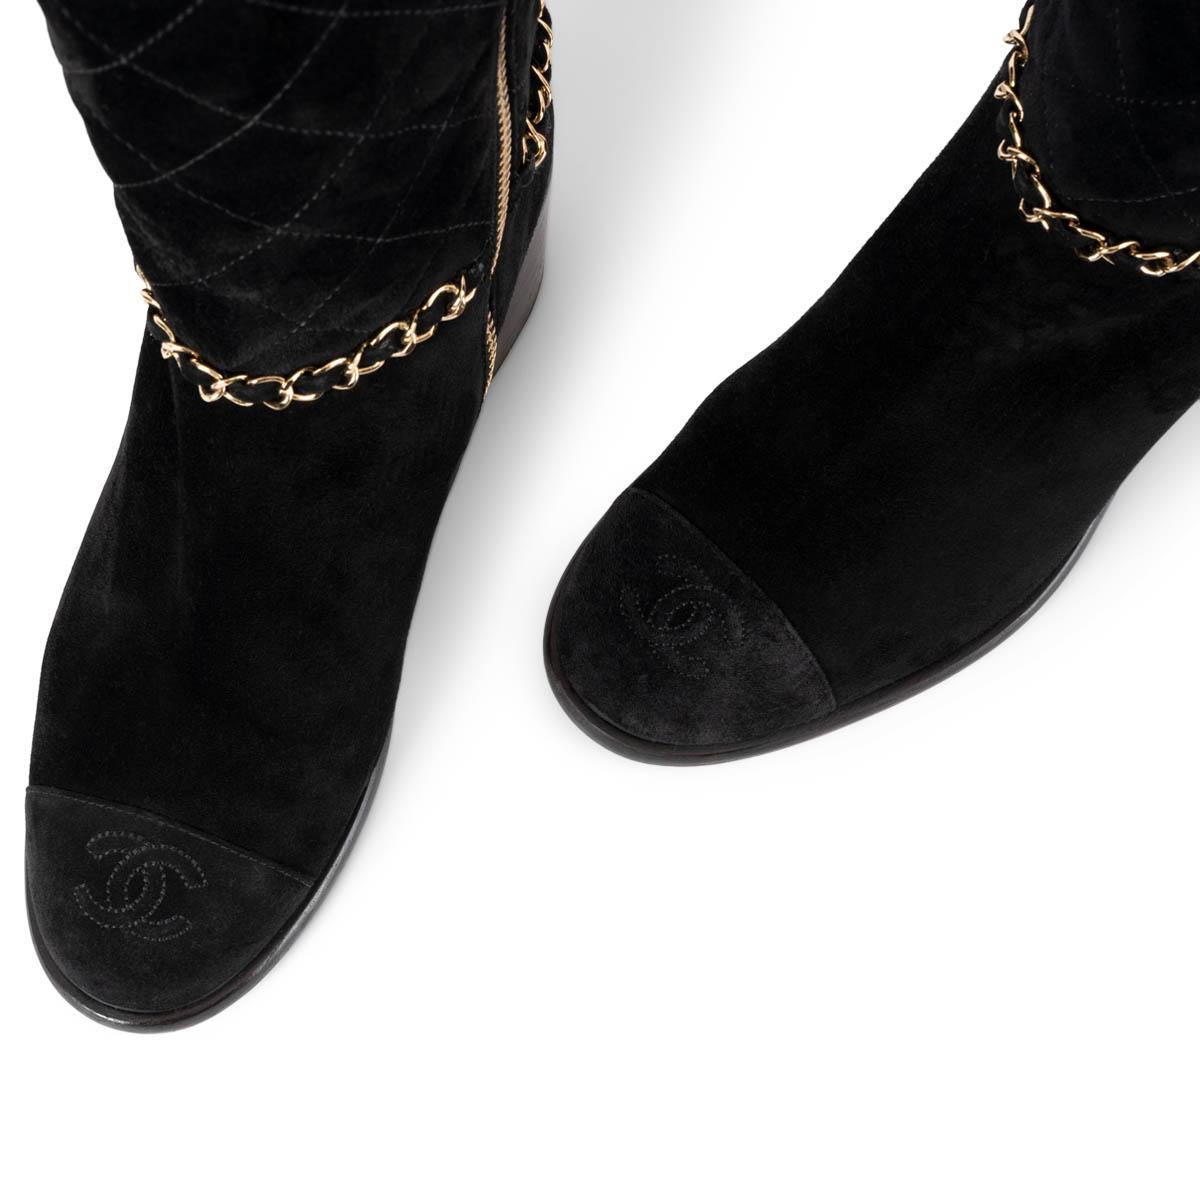 CHANEL black suede 2019 19B QUILTED CHAIN TRIM Boots Shoes 37.5 For Sale 2